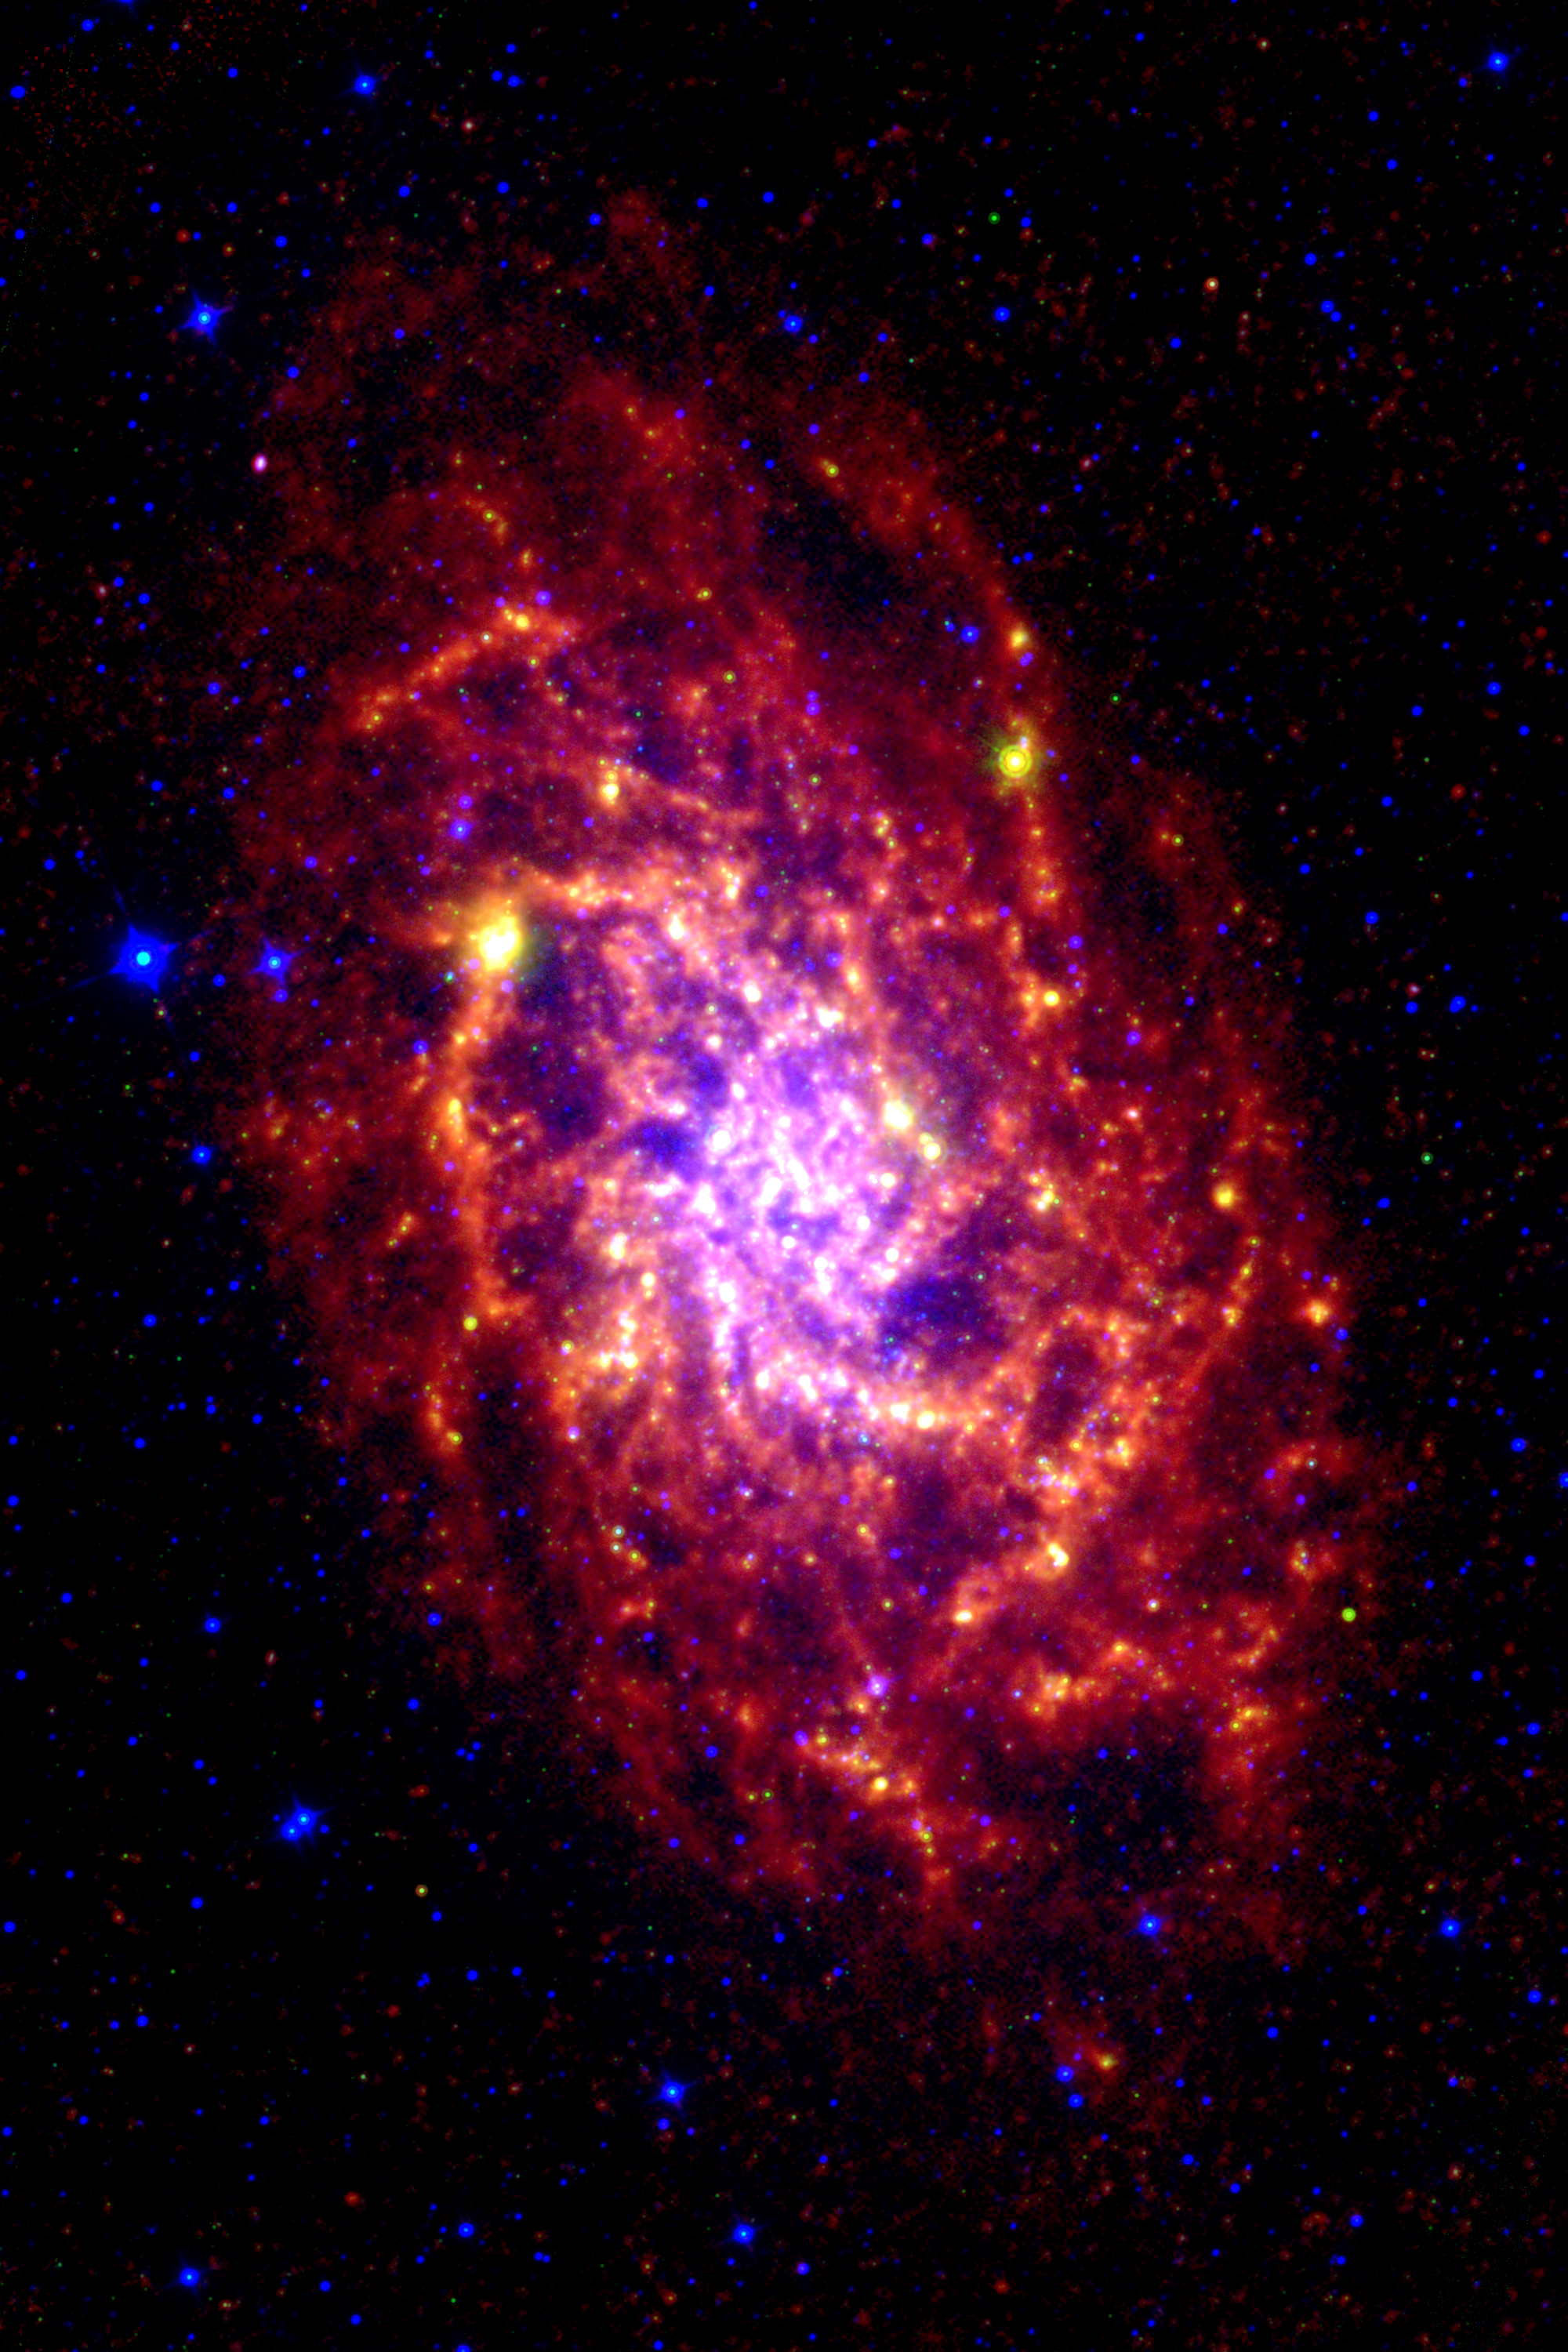 M33 (NGC 598) as seen in the infrared